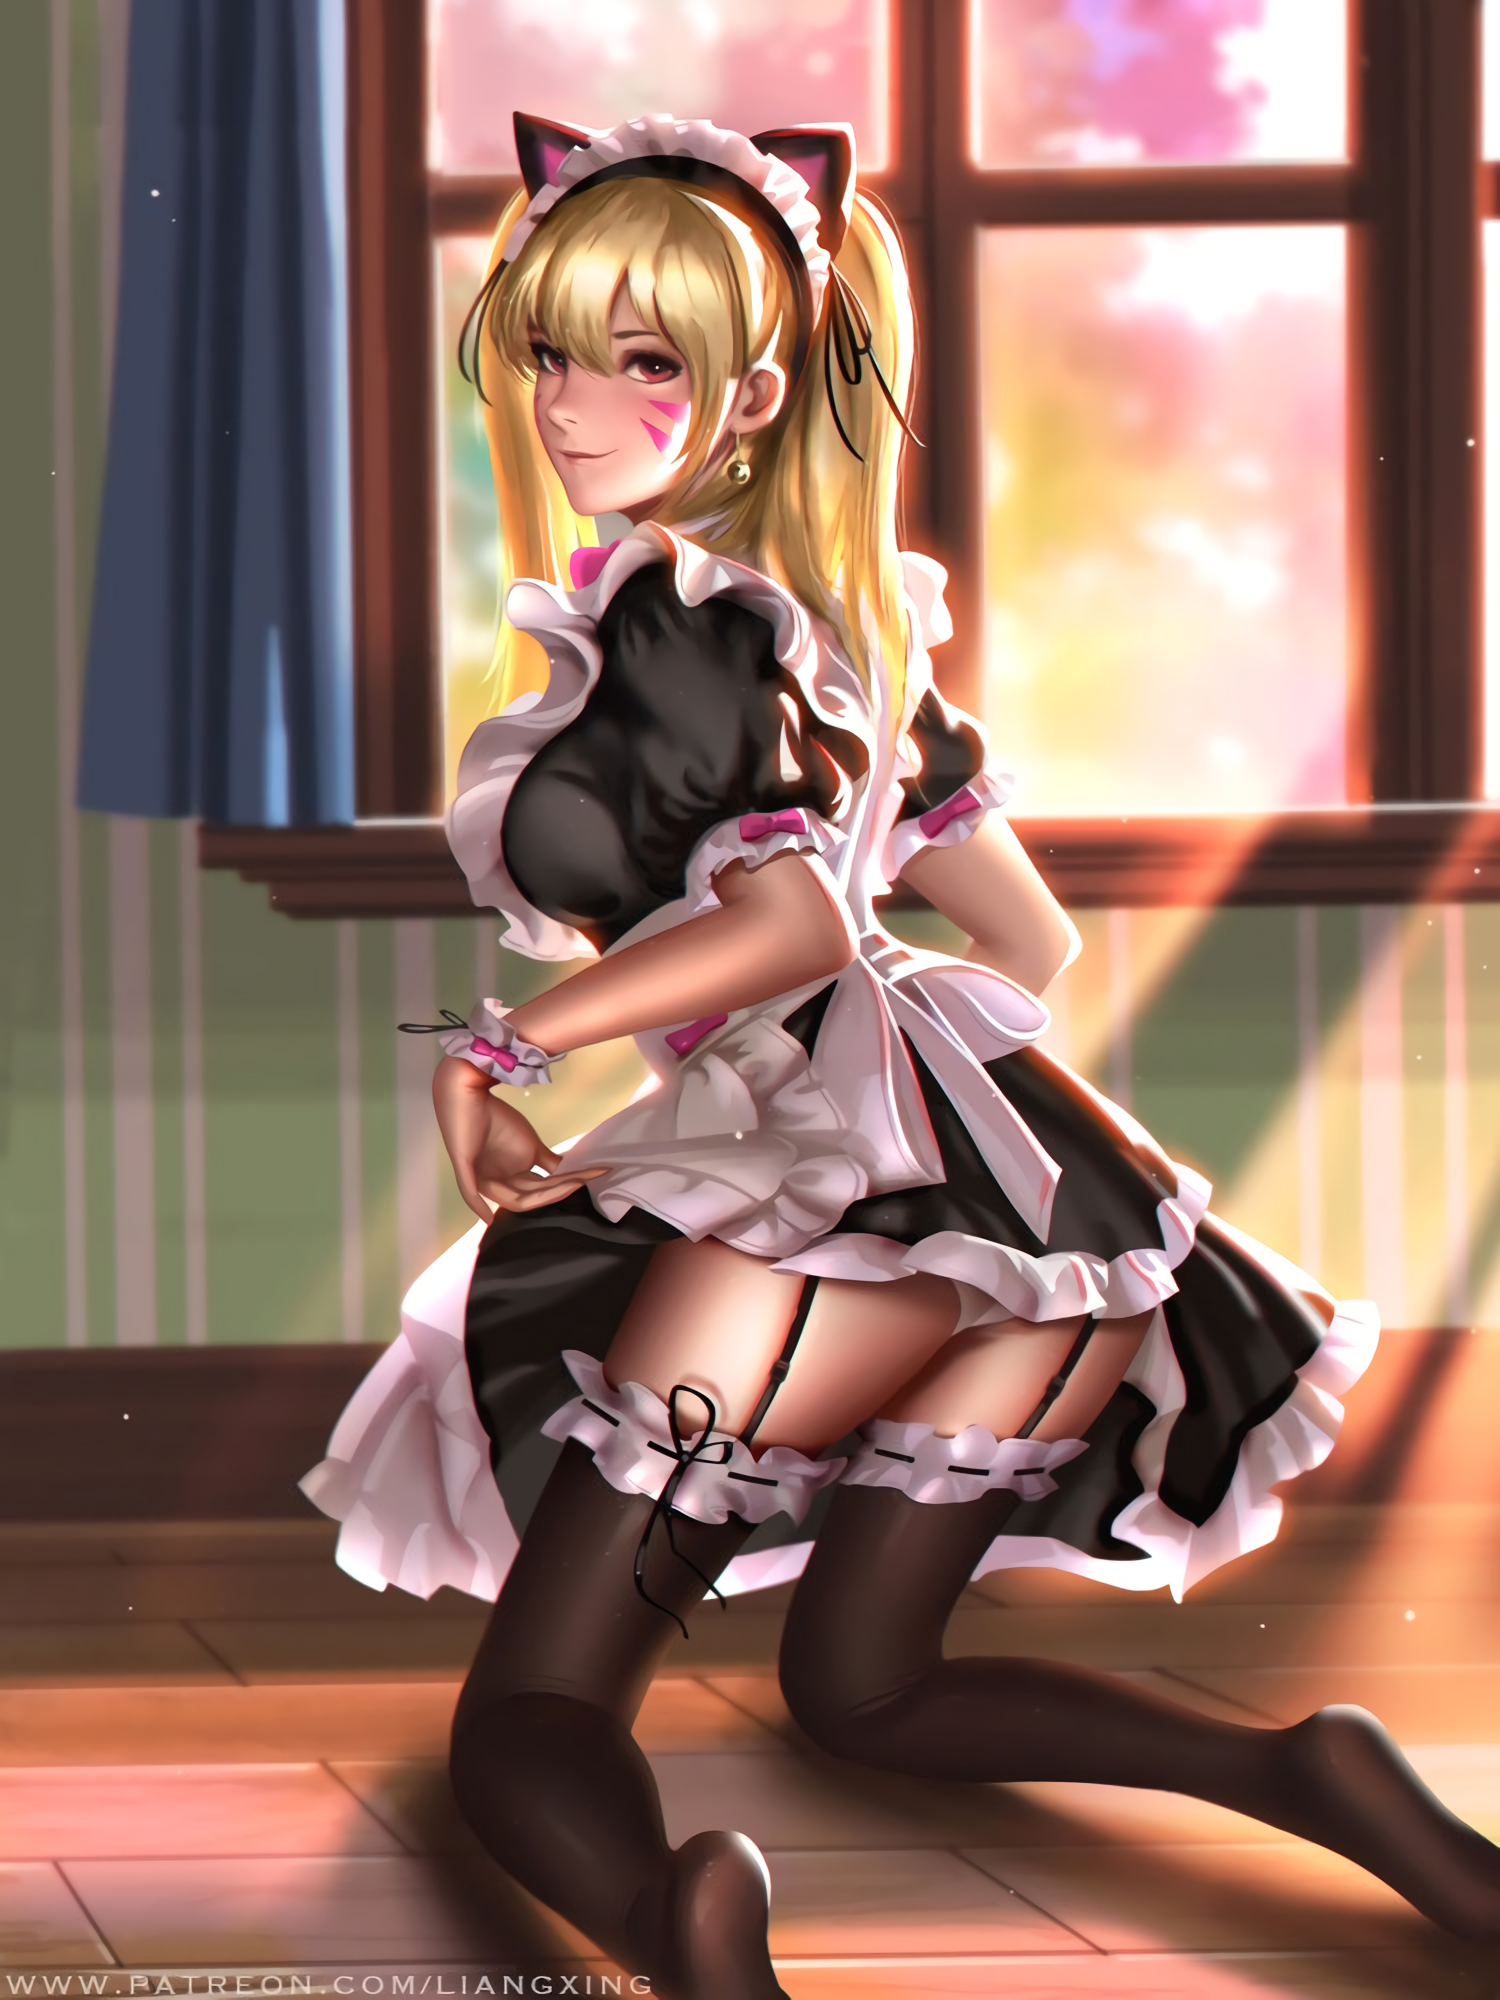 General 1500x2000 Overwatch D.Va (Overwatch) stockings maid panties blonde Jason Liang lingerie anime maid outfit French maid kneeling digital art